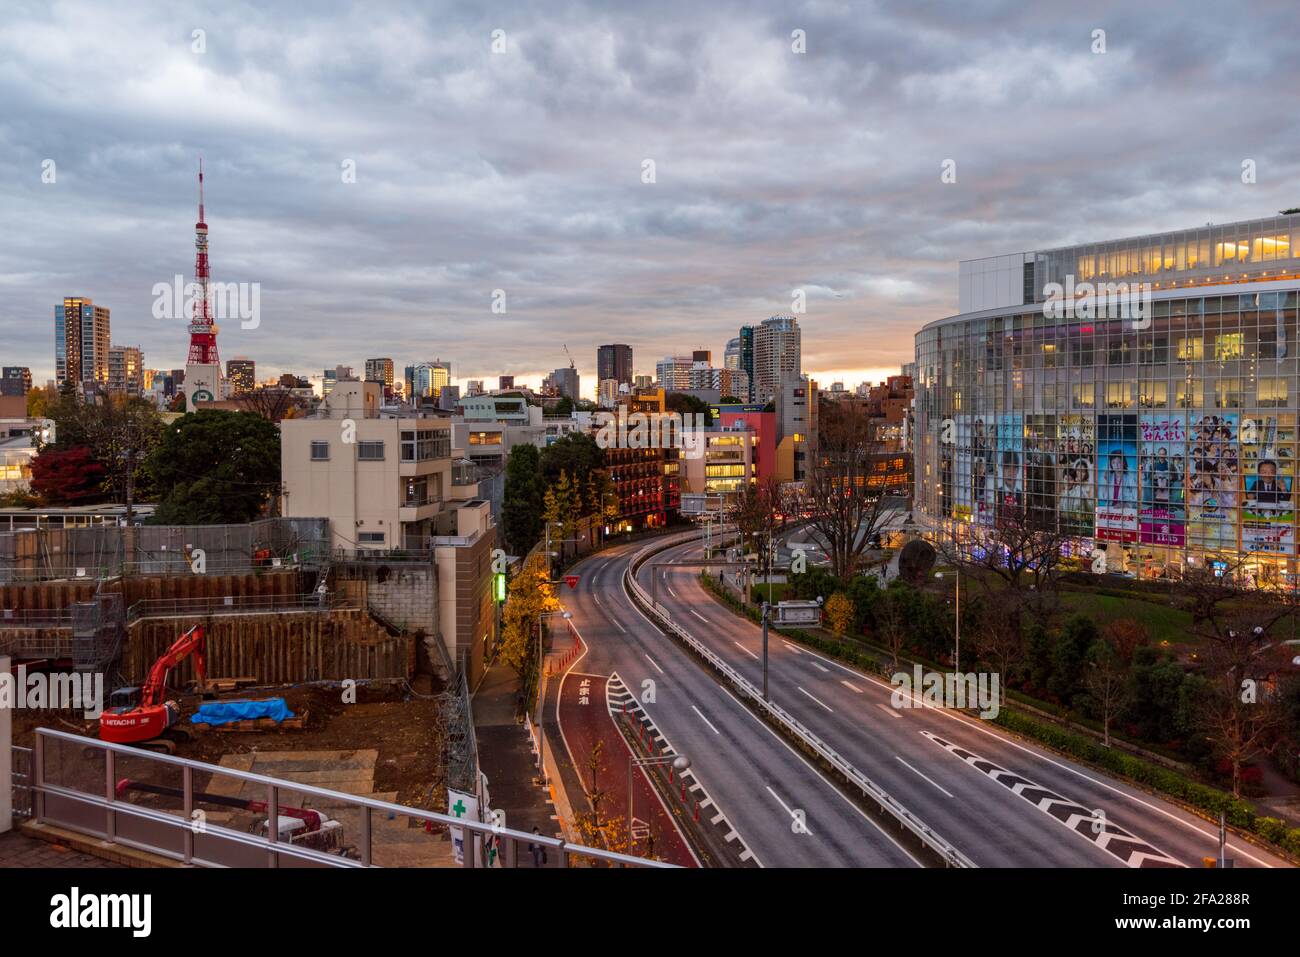 Tokyo, Japan - December 11, 2015: Elevated evening view of the city skyline and iconic Tokyo Tower, Tokyo, Japan, Asia Stock Photo